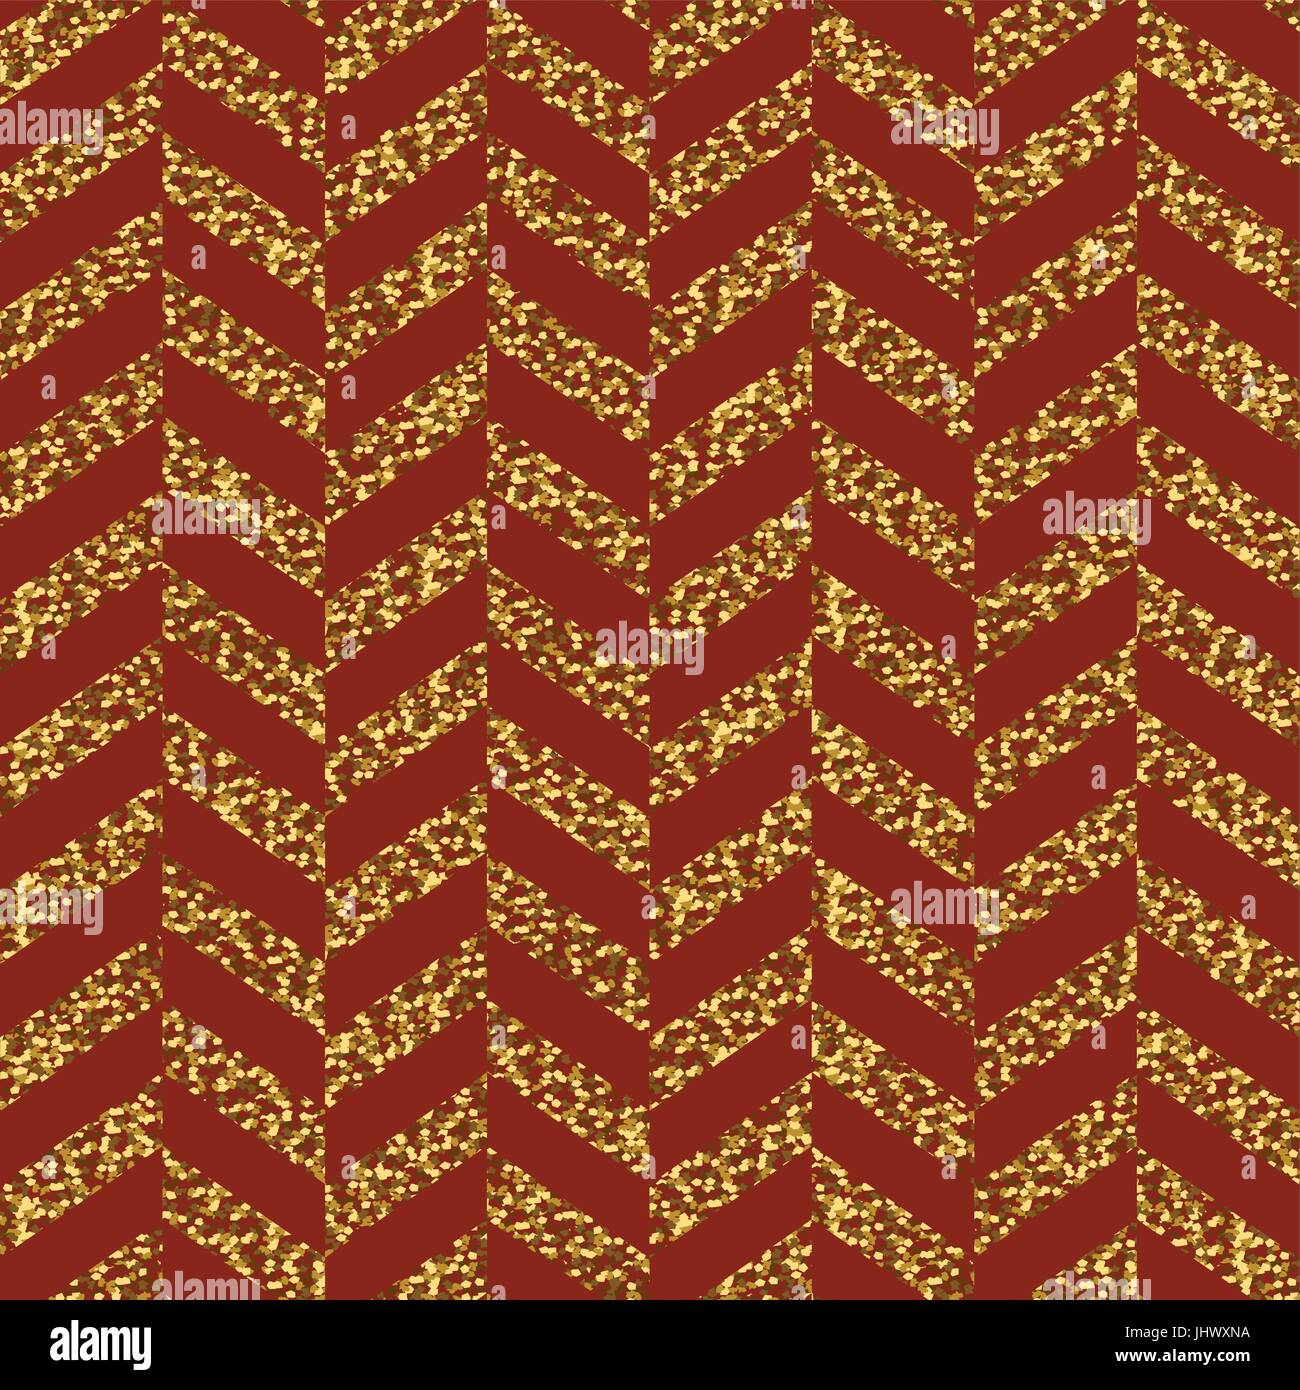 Christmas Seamless chevron pattern. Red and gold. Glittering golden surface.  Template for Greeting Scrapbooking, Congratulations, Invitations, Packag Stock Vector